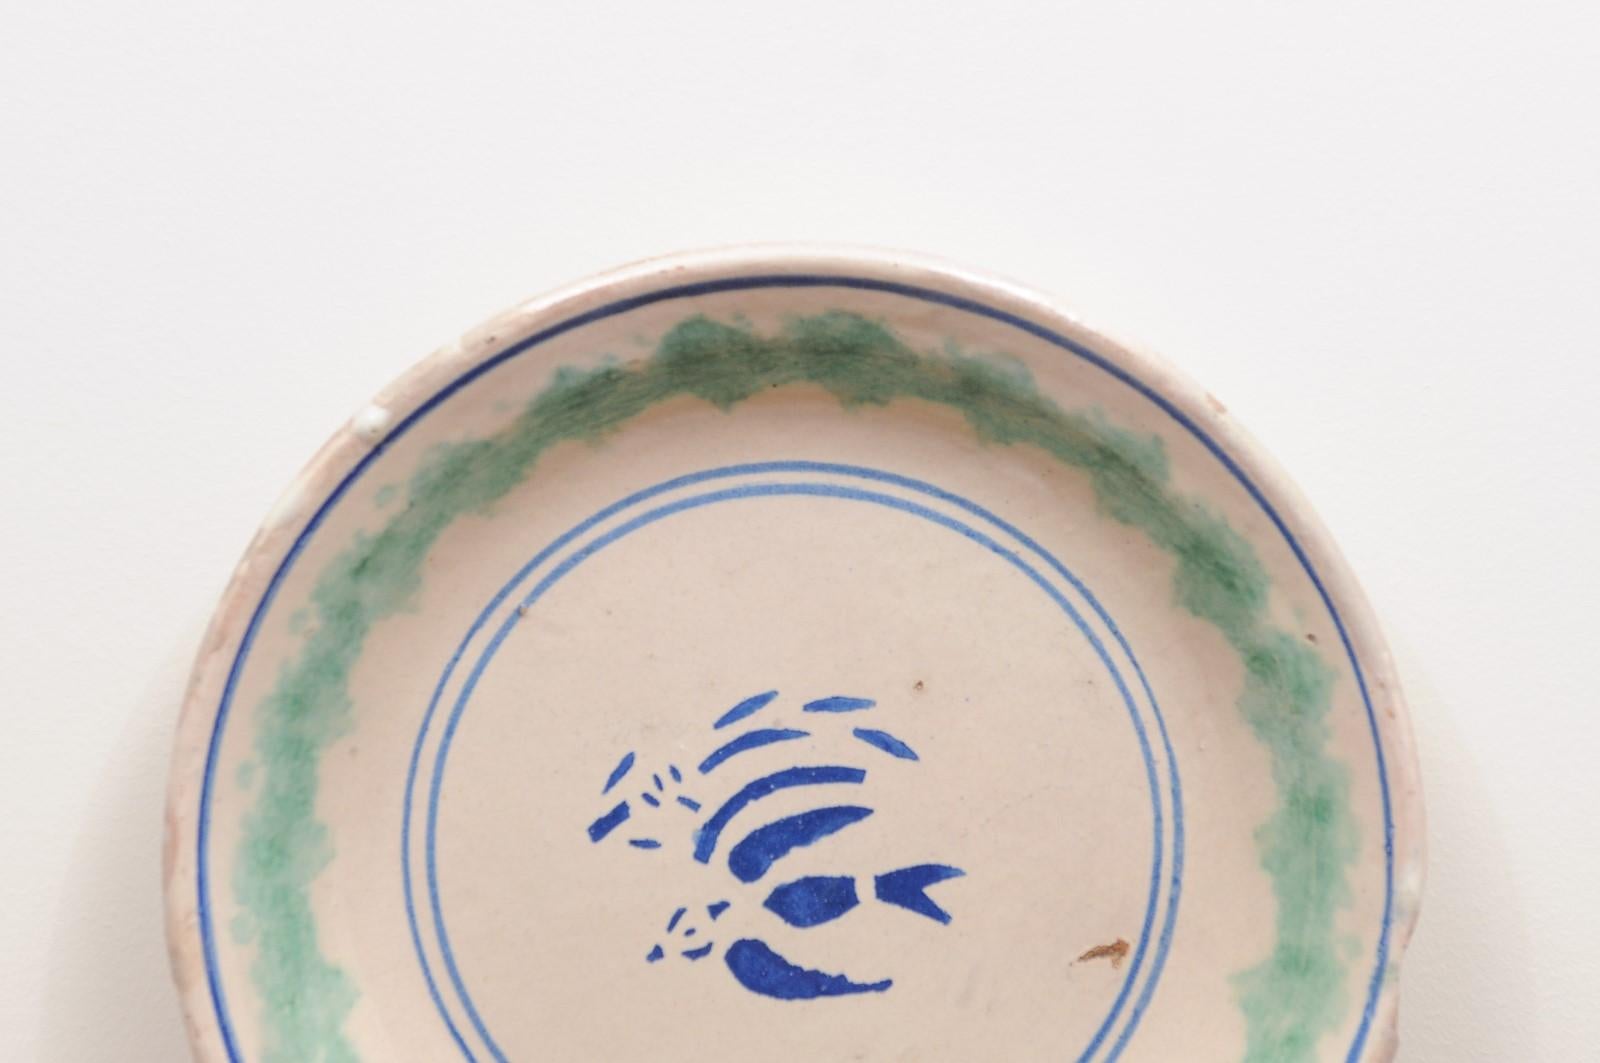 Italian 19th Century Plate with Stylized Blue Bird Motifs and Green Accents 1